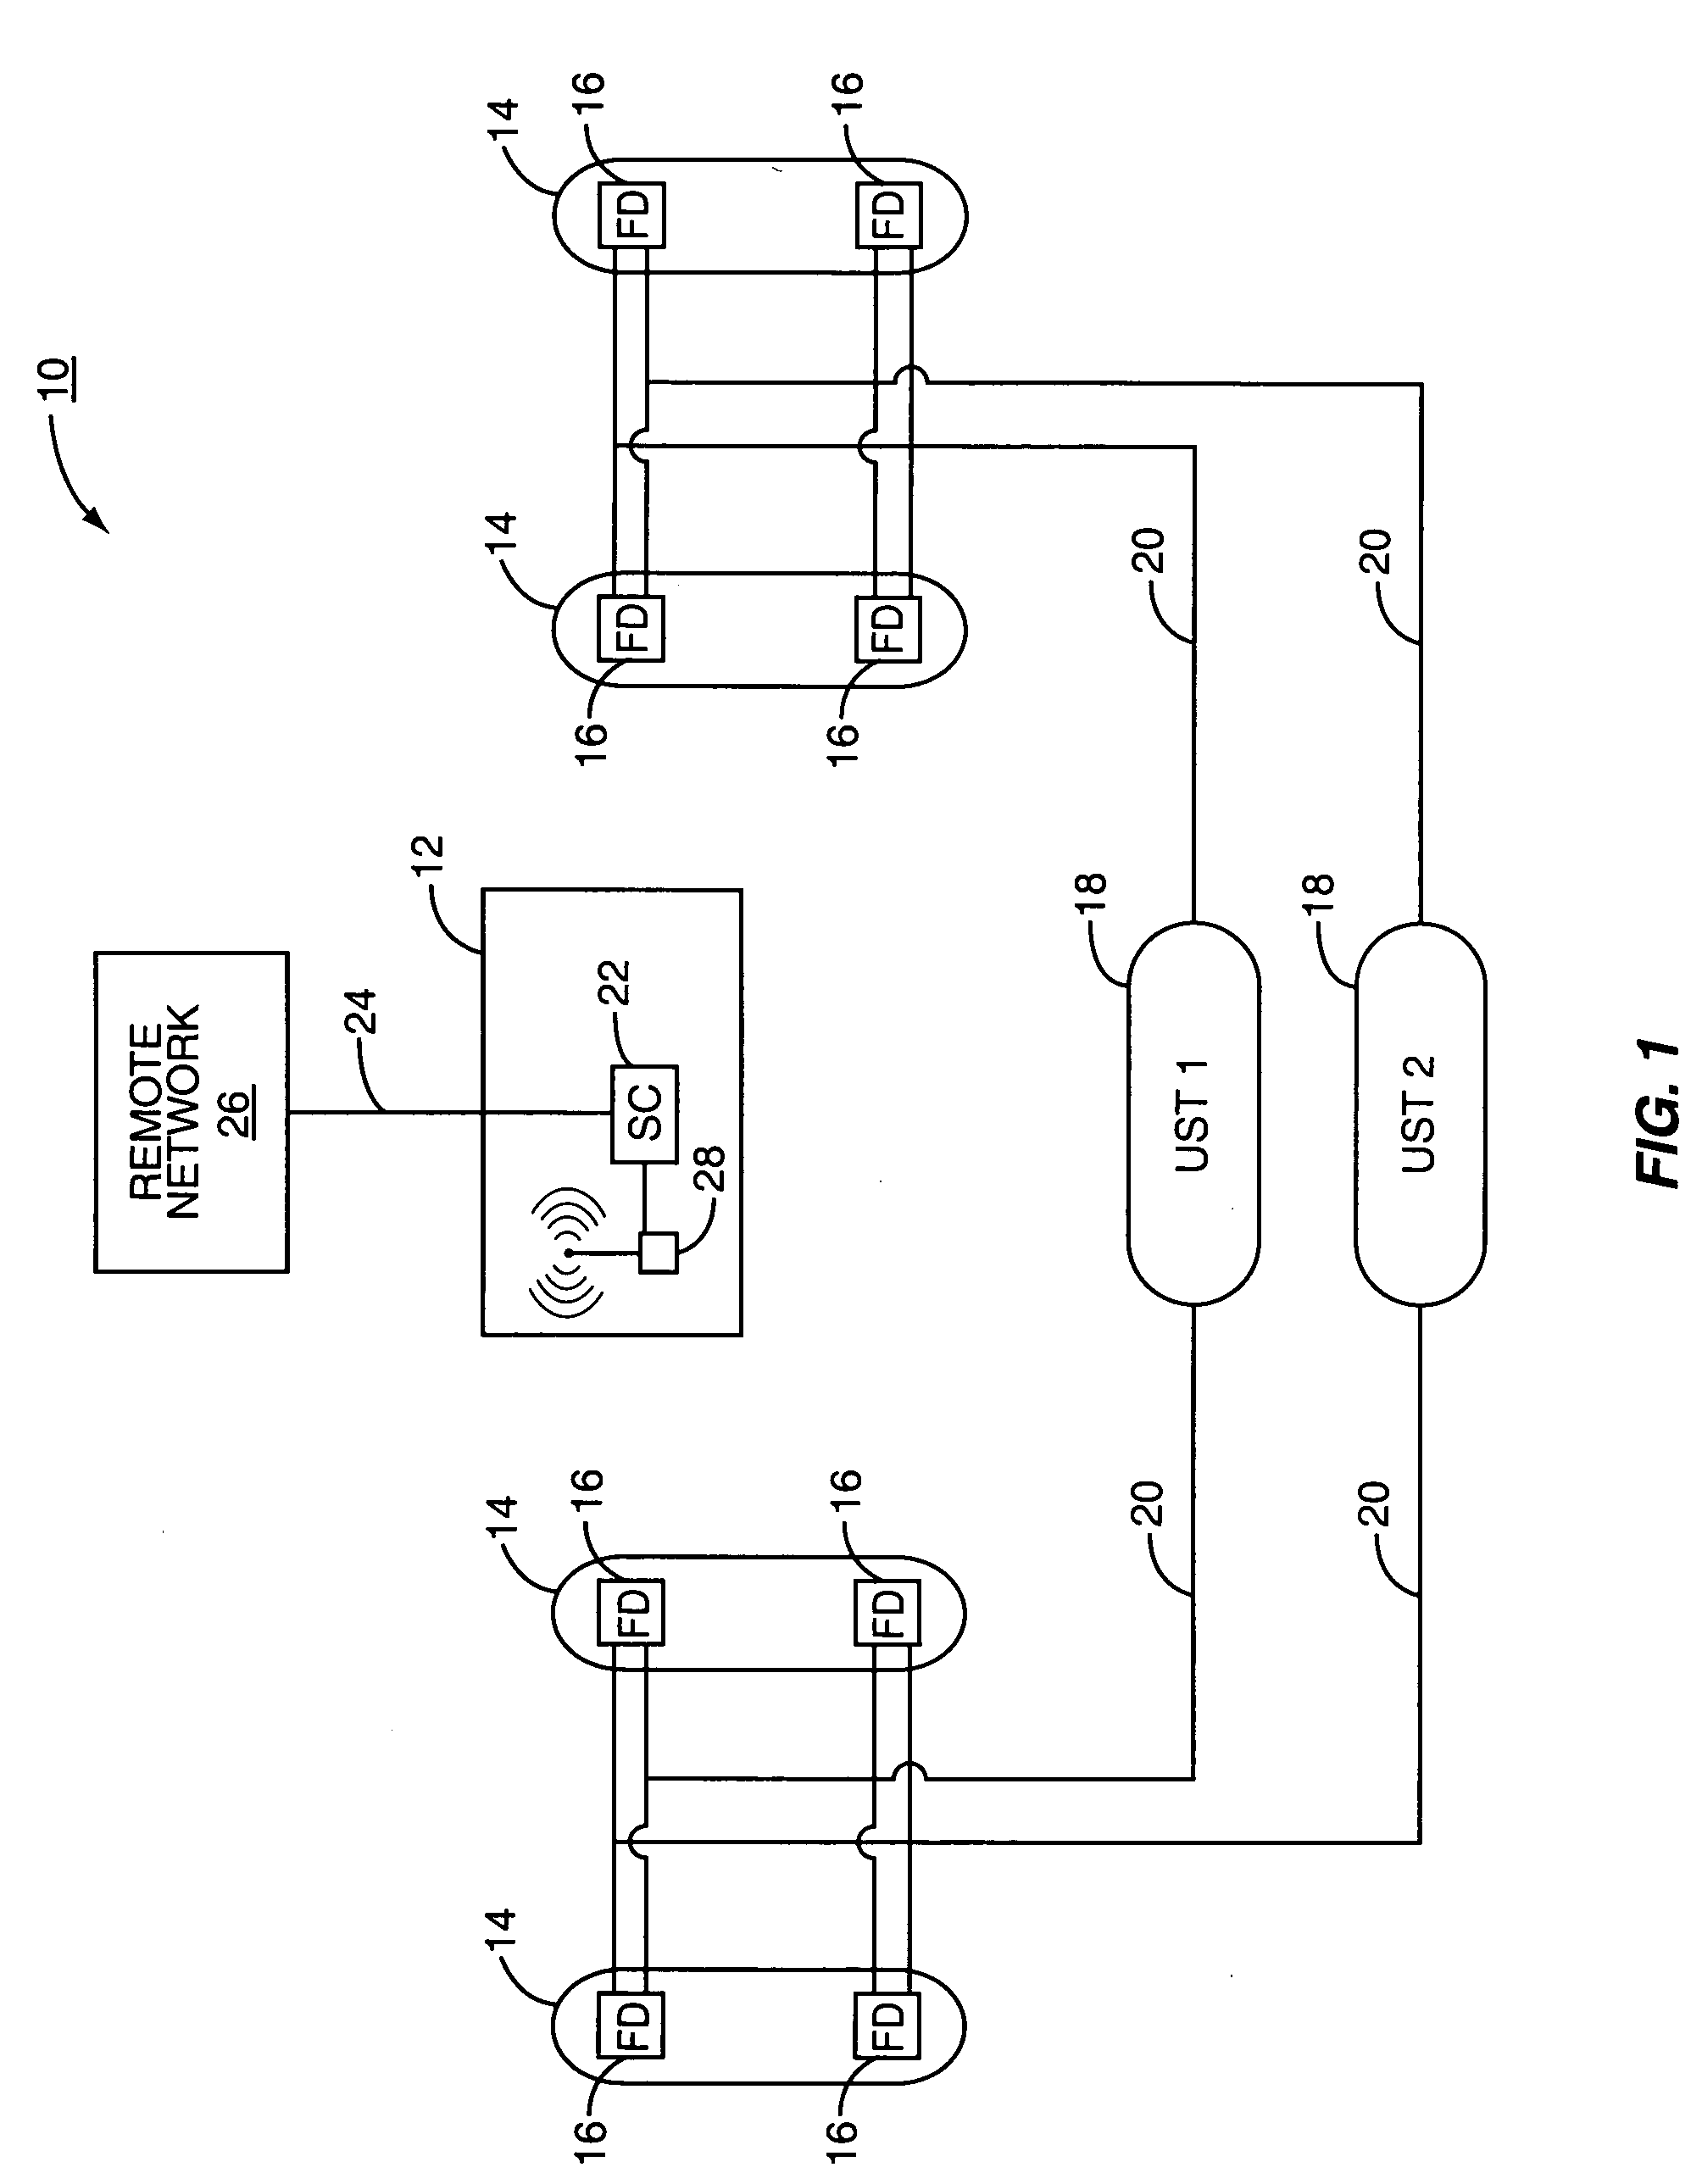 Wireless probe system and method for a fueling environment